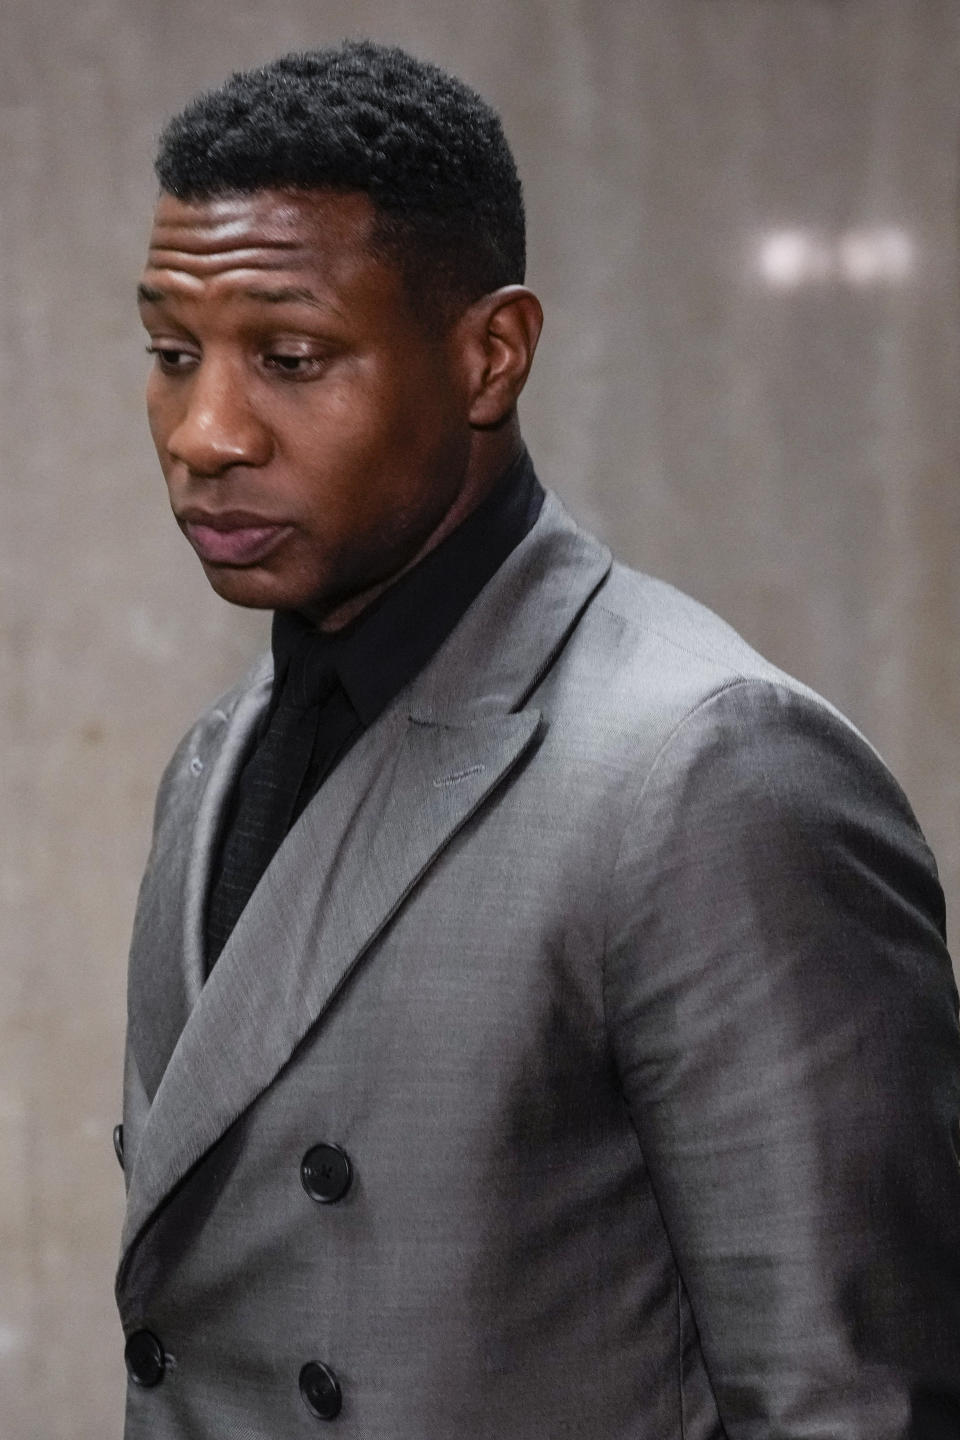 Jonathan Majors leaves a courtroom in New York, Monday, Dec. 18, 2023. Majors was convicted of assaulting his former girlfriend during a confrontation in New York City earlier this year. A Manhattan jury convicted the Marvel star Monday of one misdemeanor assault charge and one harassment violation. (AP Photo/Seth Wenig)